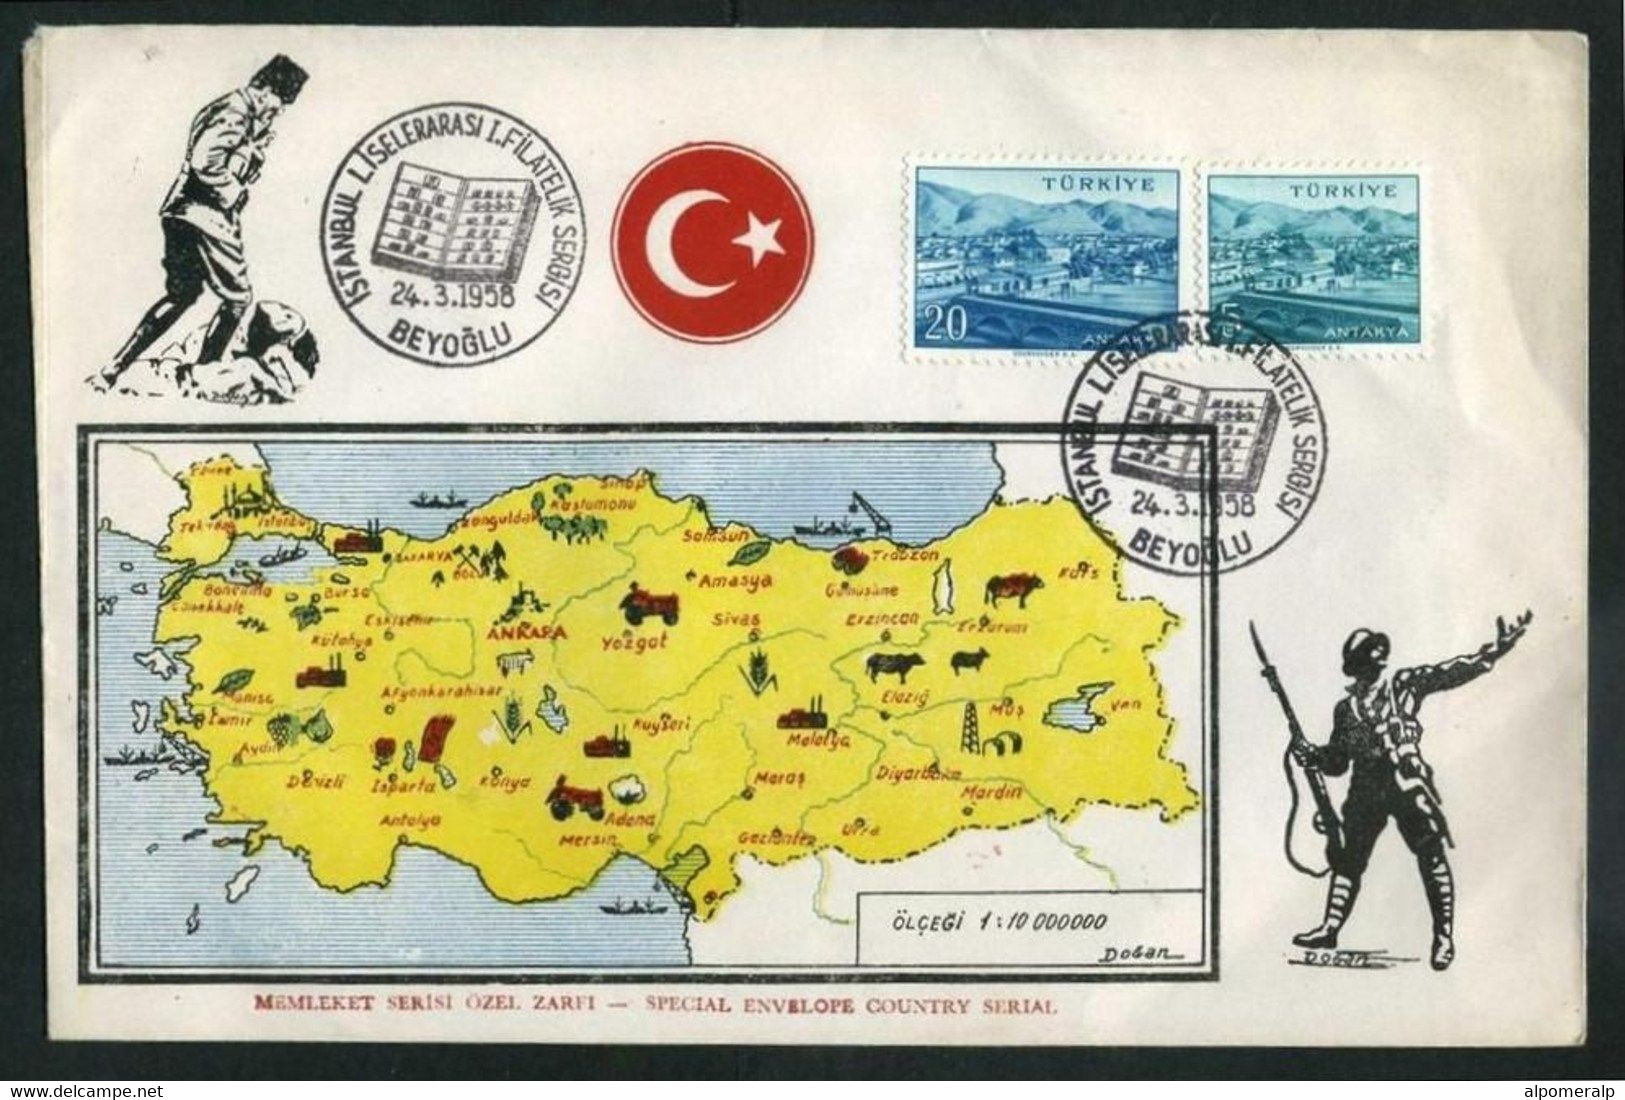 Turkey 1958 Philatelic Exhibition | Map And Flag Of Turkey | Soldier With Bayonet Rifle, Mar.24 | Special Postmark - Briefe U. Dokumente